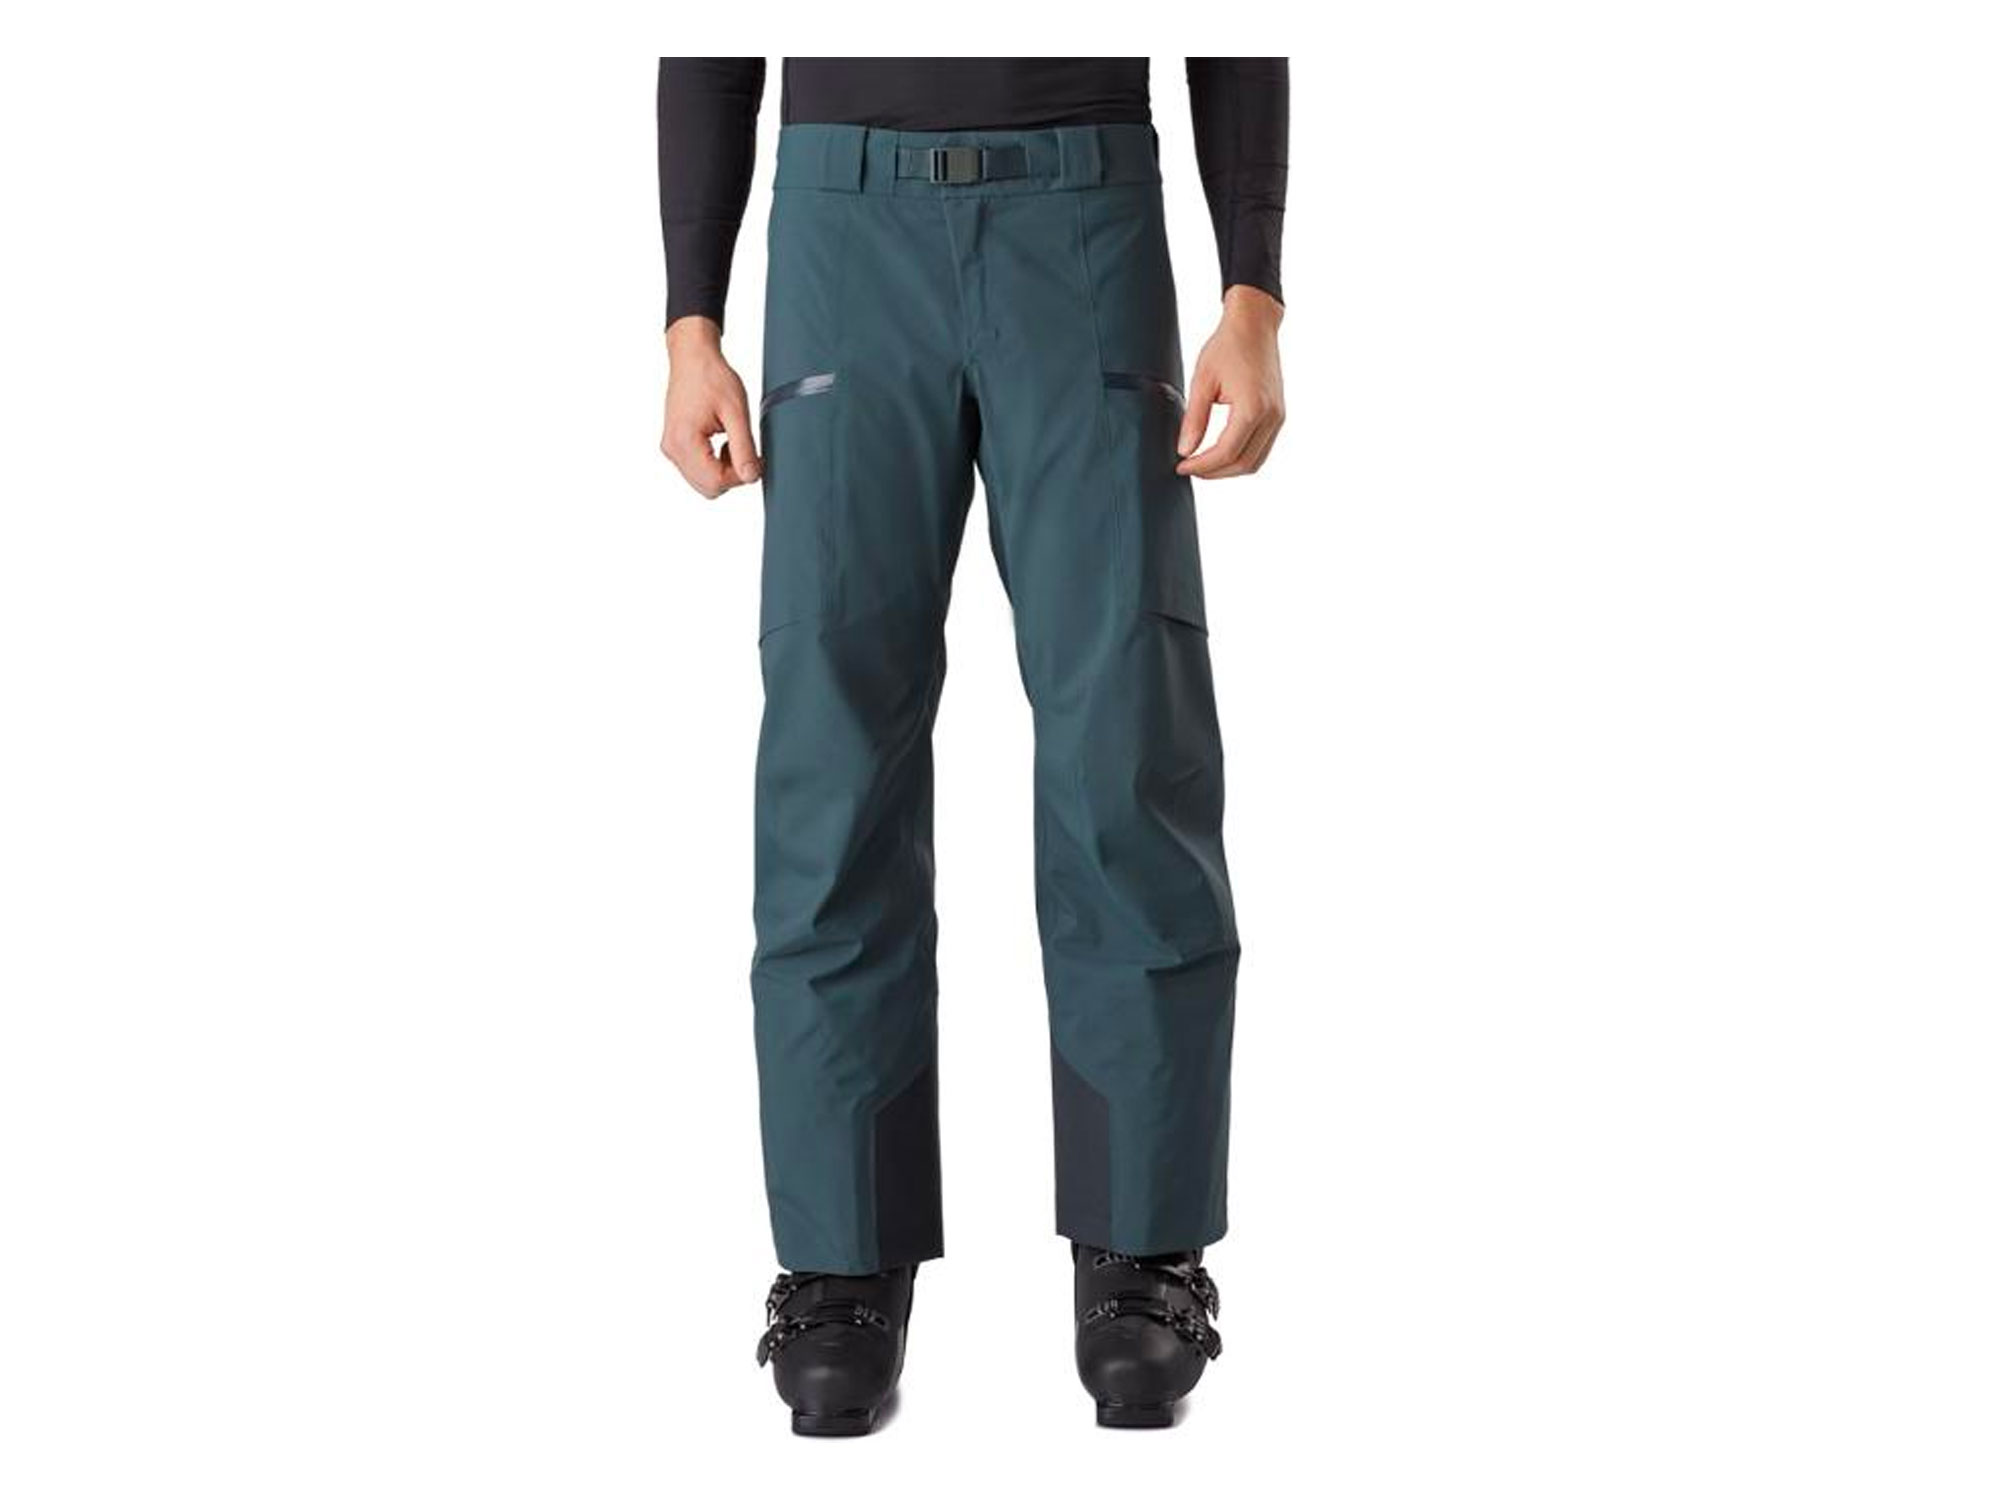 Best Ski Pants for Downhill Skiing, Backcountry & More